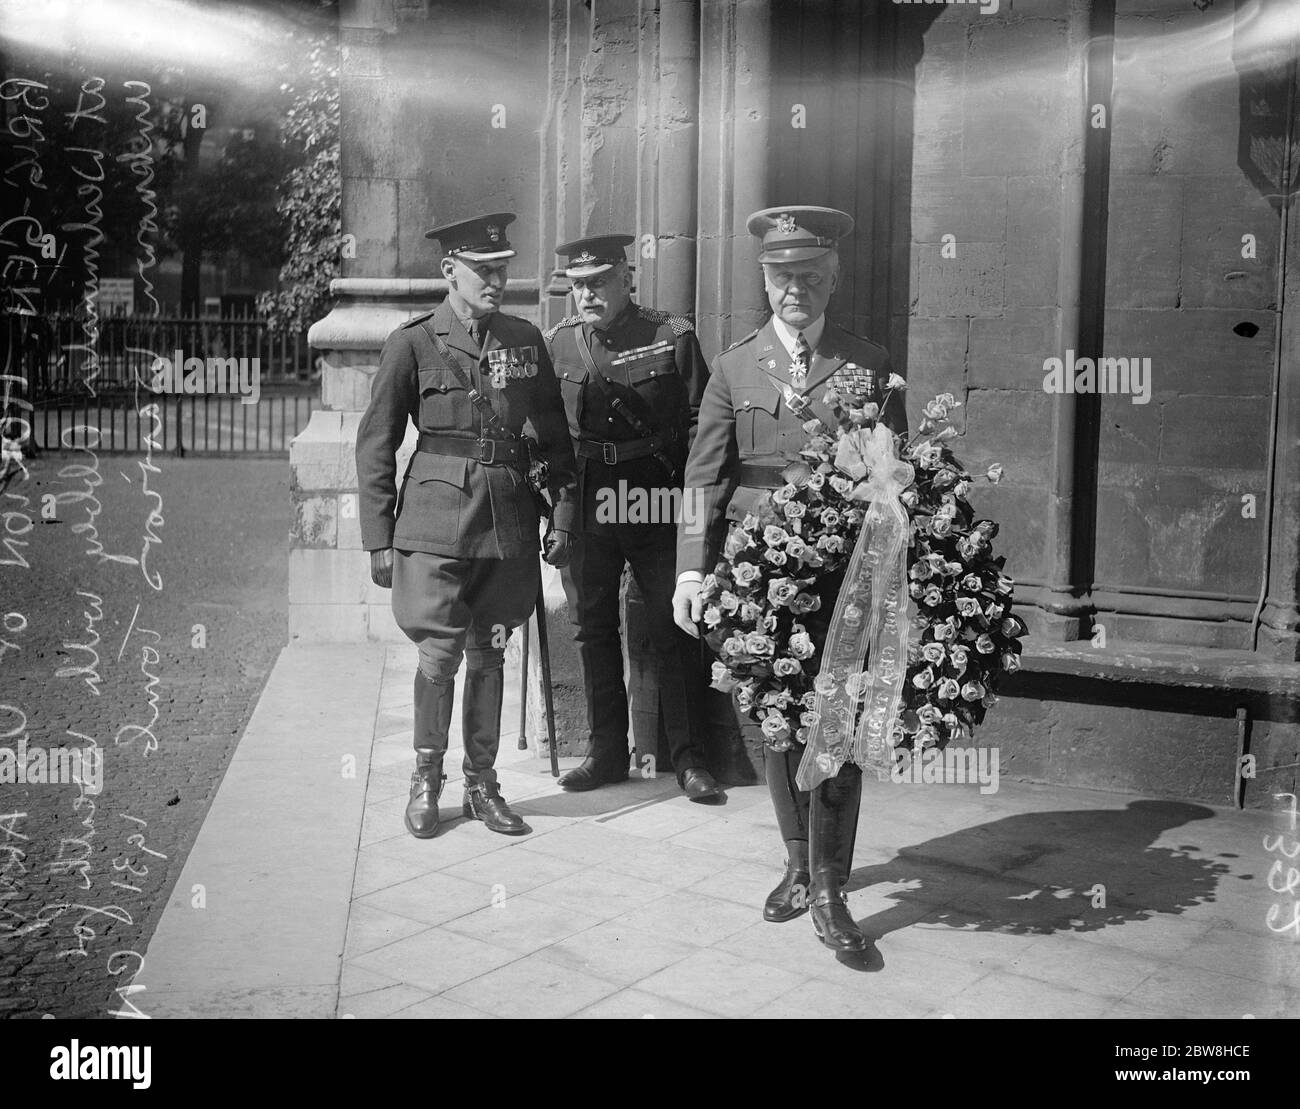 American Army 's tribute to grave of unknown warrior in London . Brigadier General Horton supported by Lord Denbigh , and officers of the HAC laid a wreath on the Tomb of the Unknown Warrior in Westminster Abbey , on behalf of the Ancient and Honourable Artillery Co , of Massachusetts . Brigadier General Horton ( with wreath ) outside the Abbey . 7 July 1931 Stock Photo